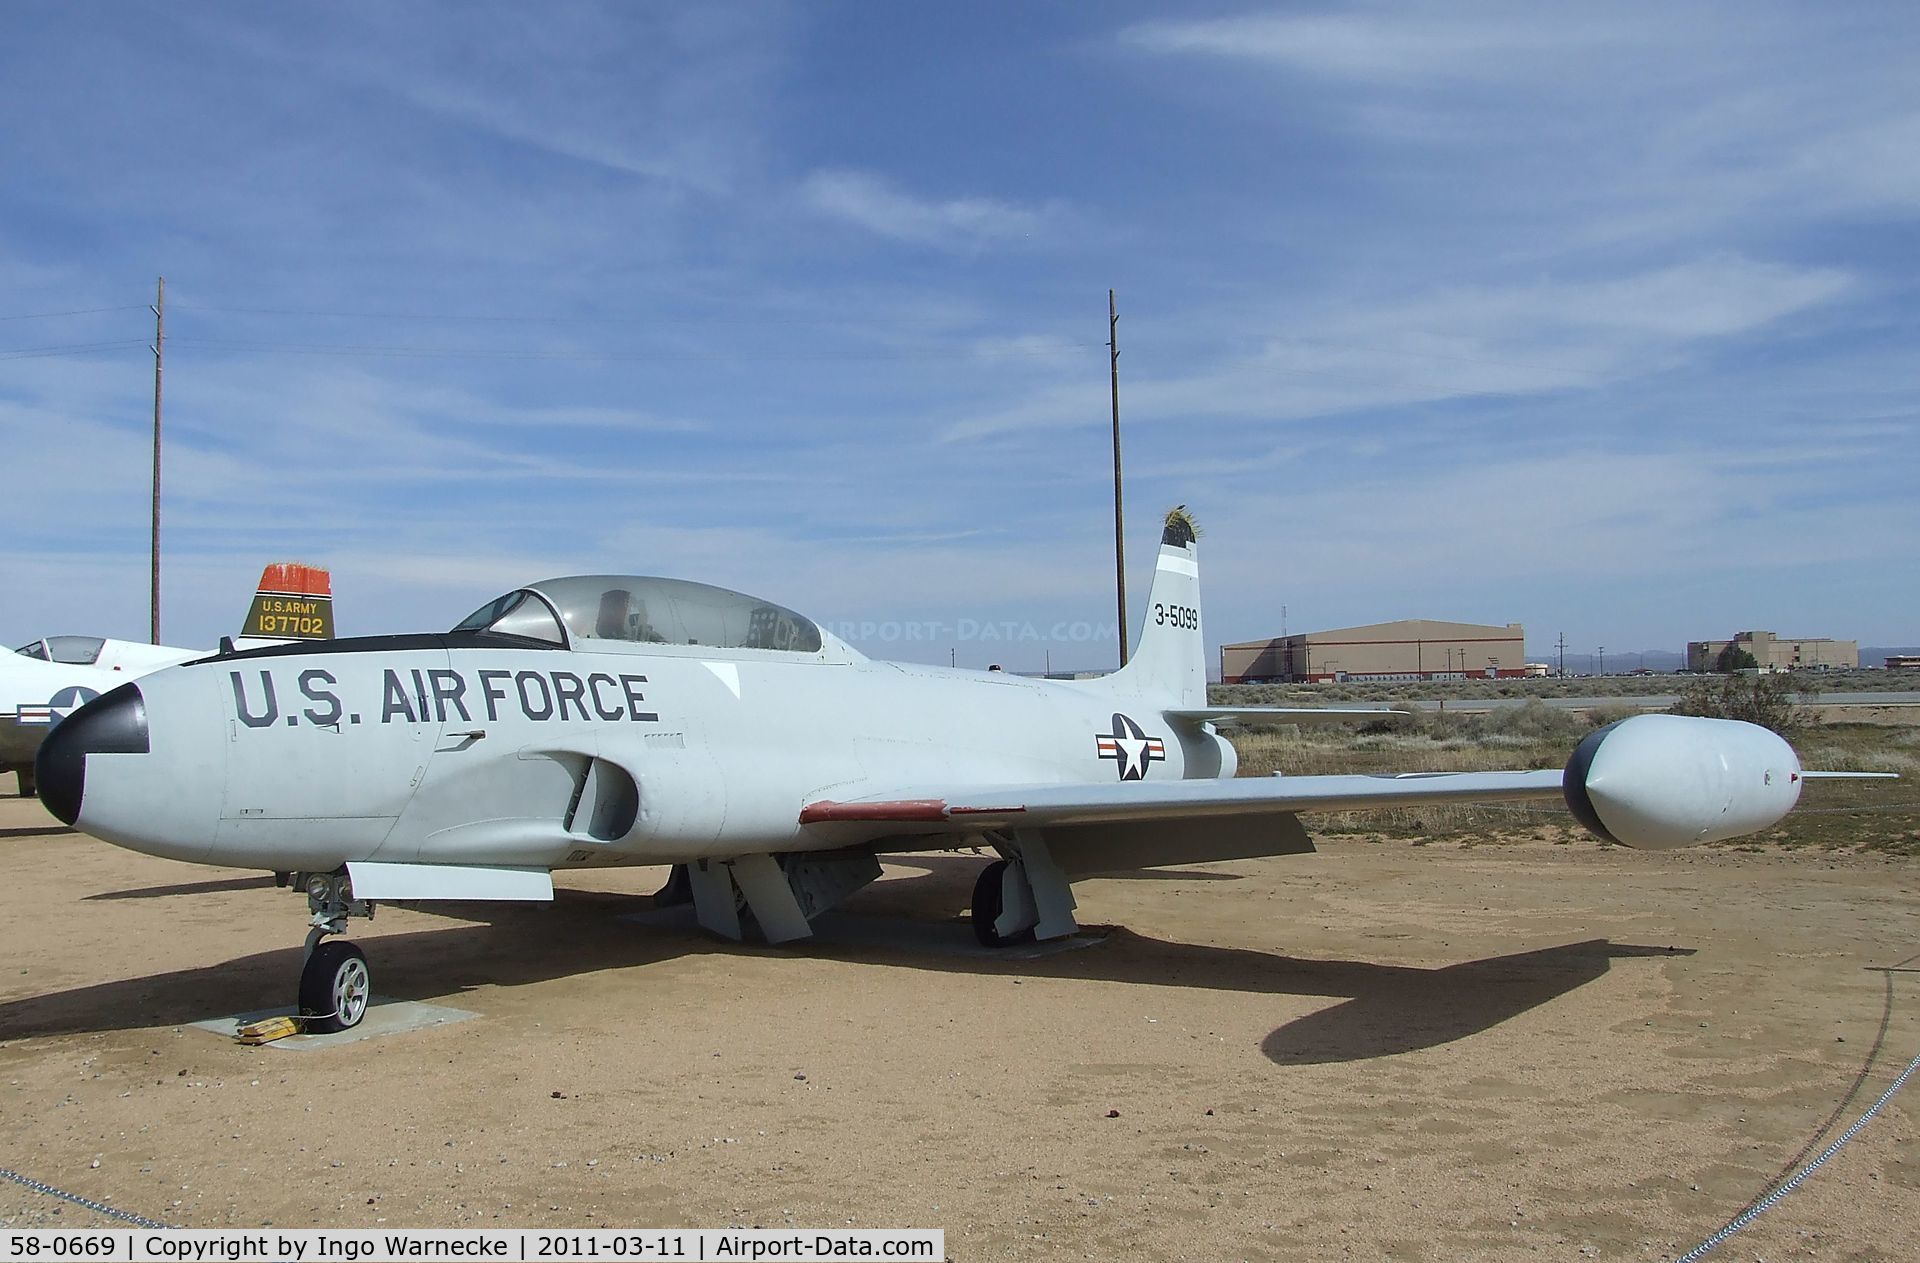 58-0669, 1958 Lockheed T-33A Shooting Star C/N 580-1718, Lockheed T-33A at the Air Force Flight Test Center Museum, Edwards AFB CA